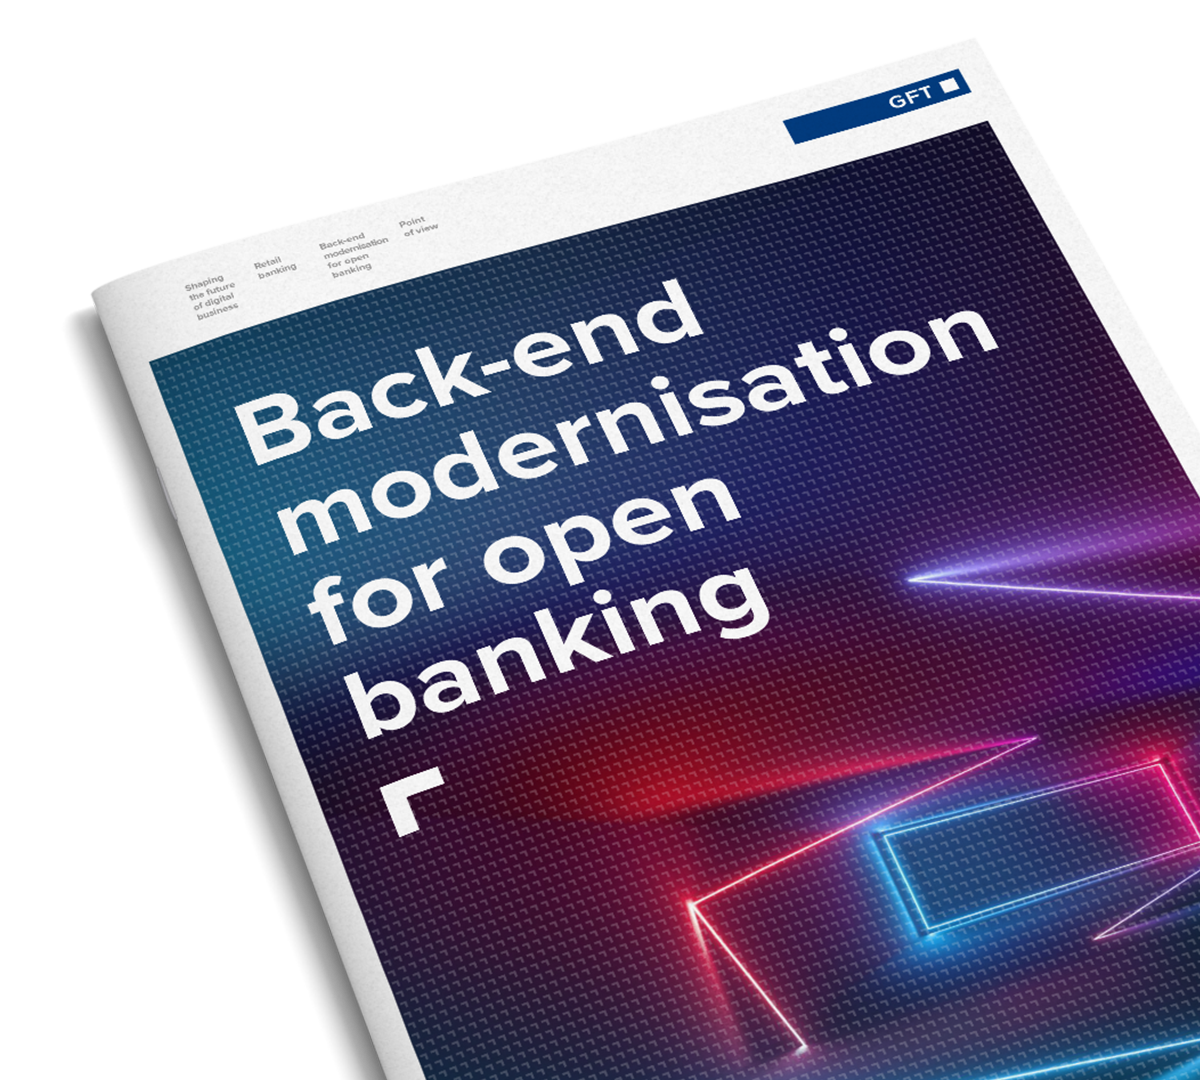 Discover why mainframe modernisation is essential to the open banking transition.